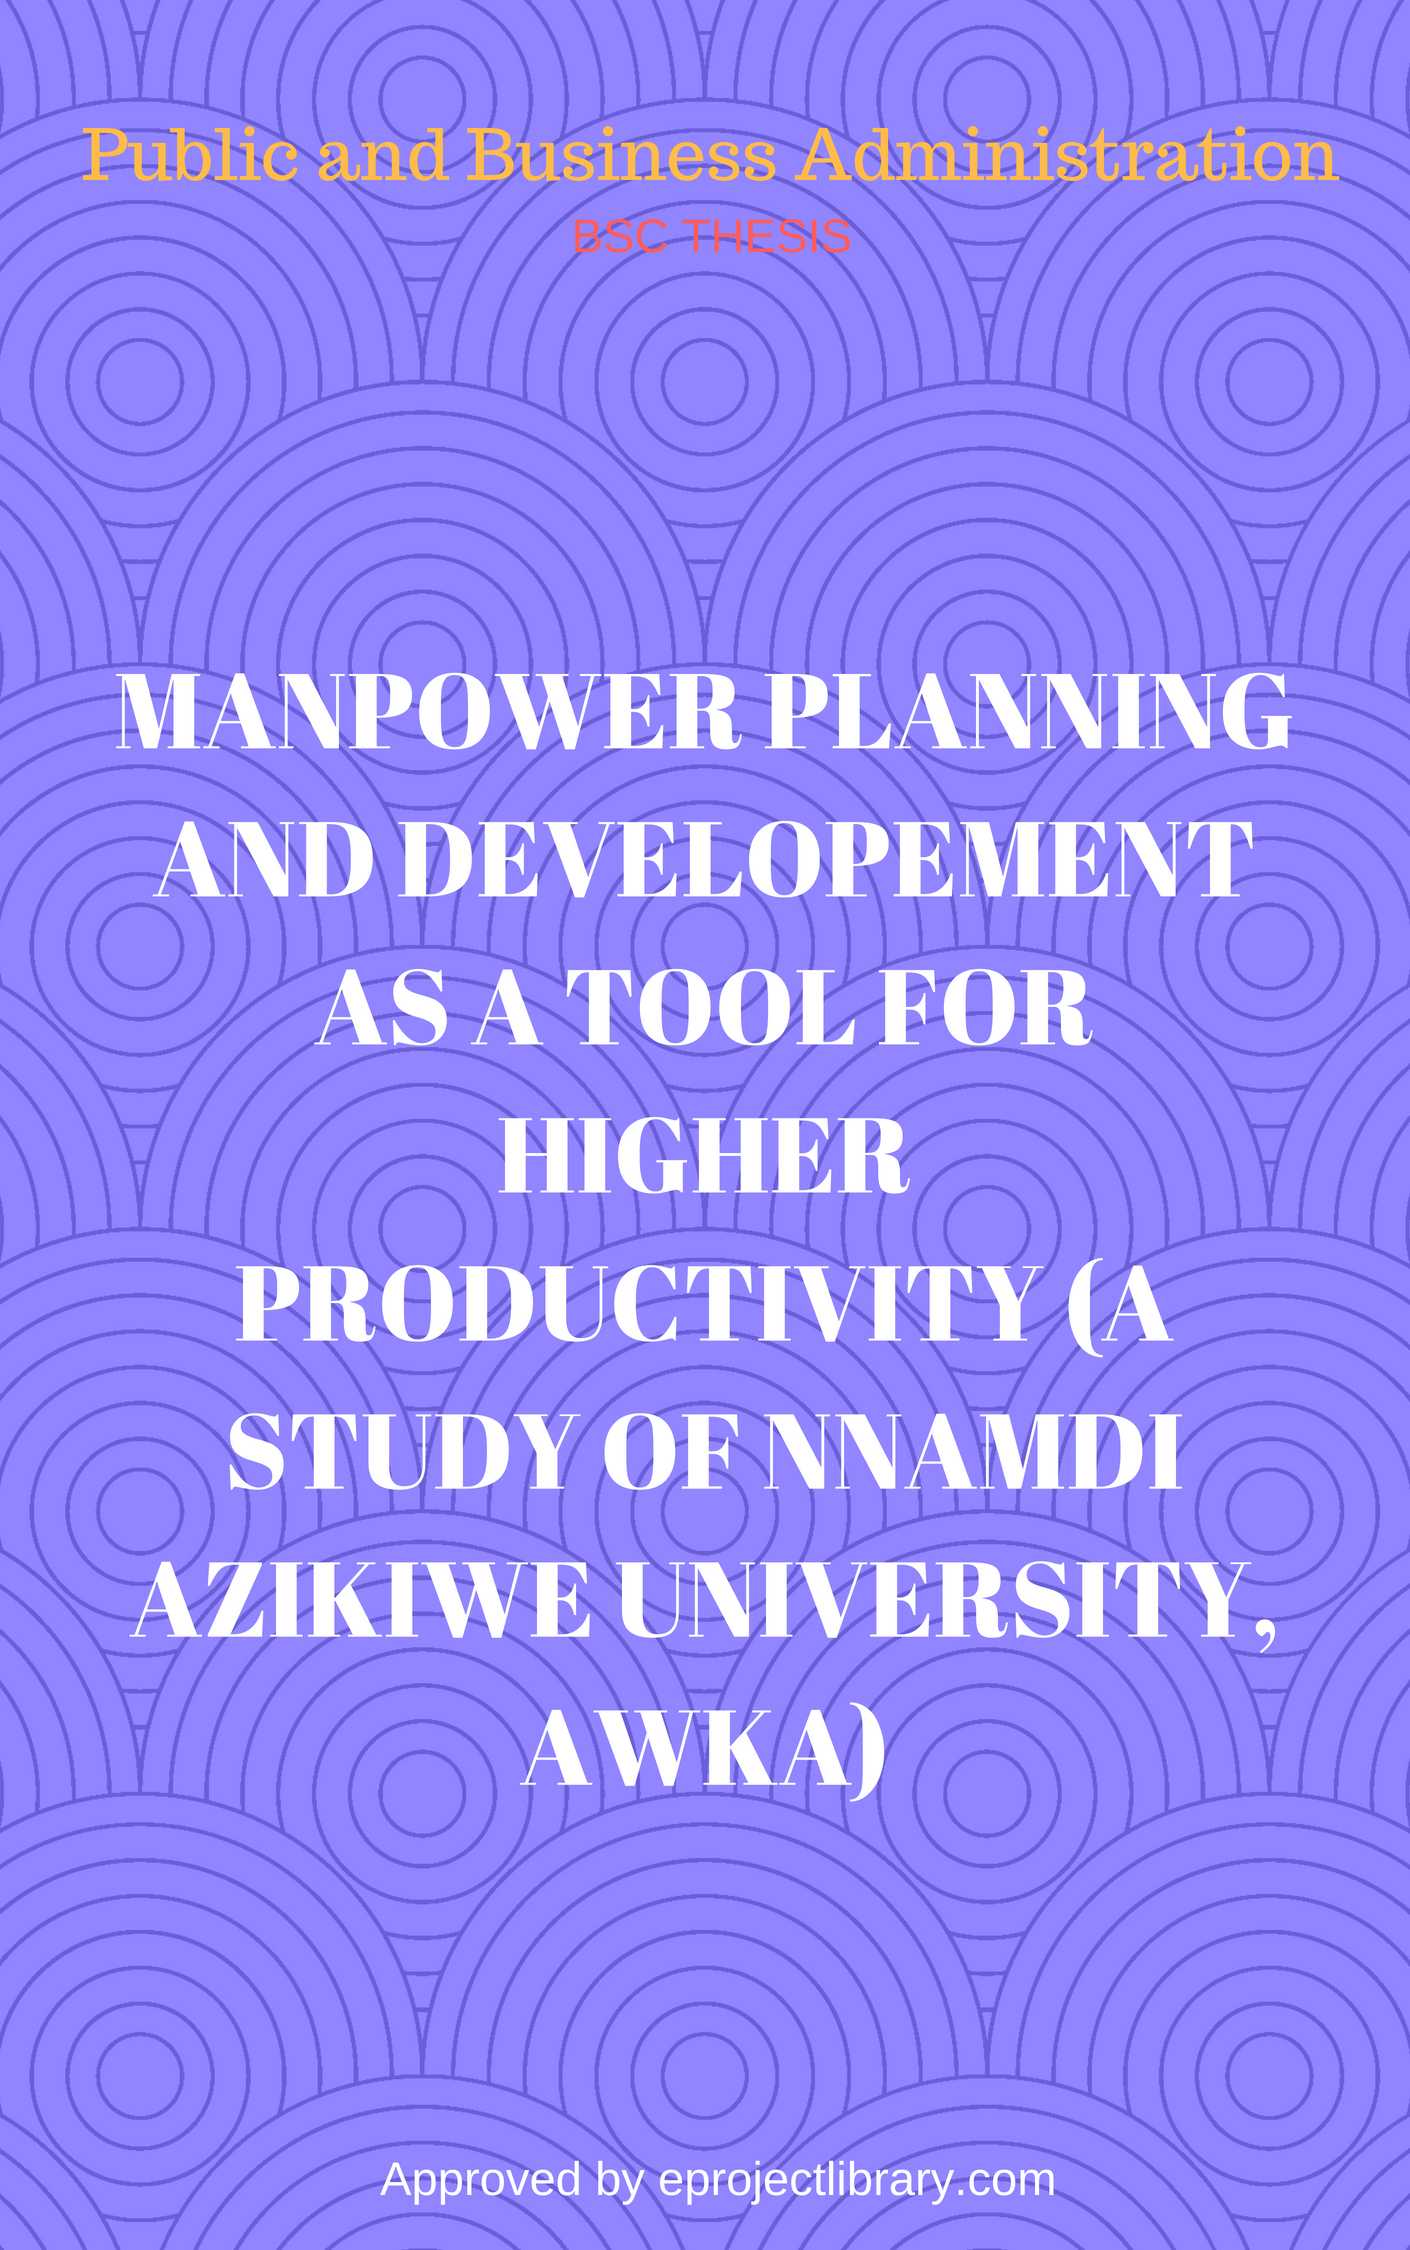 reasons for manpower planning